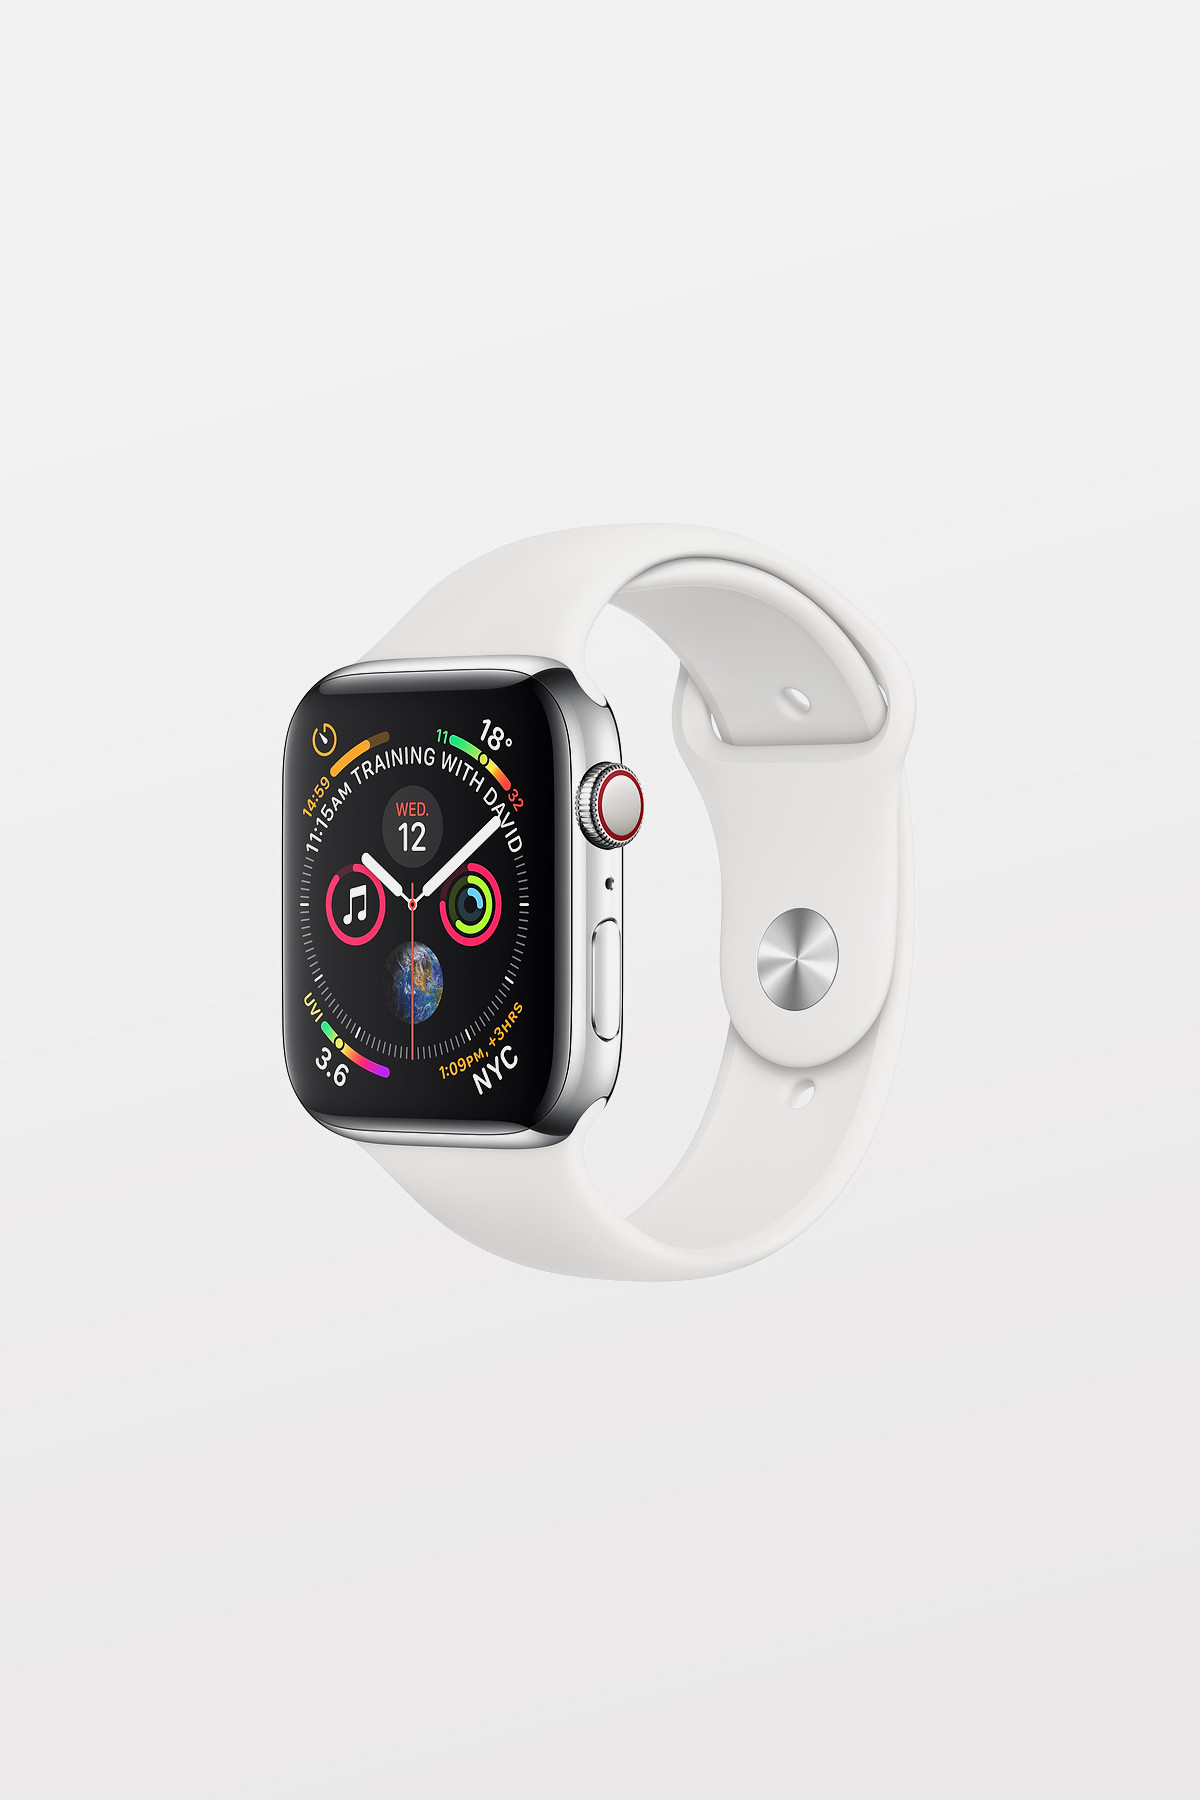 Apple Watch Series 4 GPS + Cellular - 44mm - Stainless Steel Case with White Sport Band - Refurbished